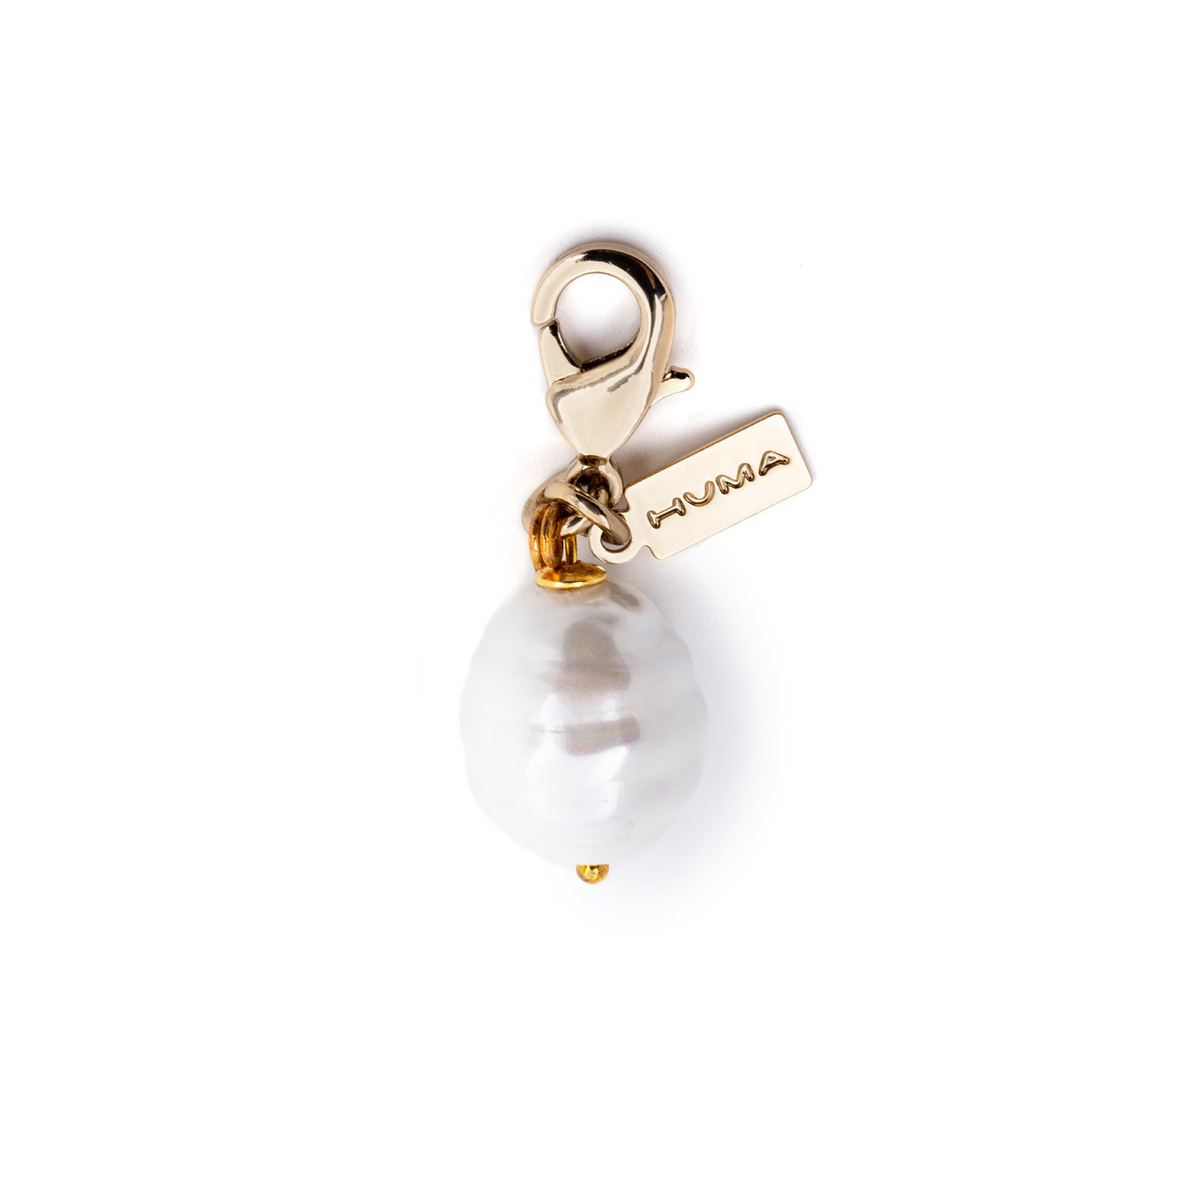 Huma EARRING RIVER PEARL E21 Gold E21 Gold - front view